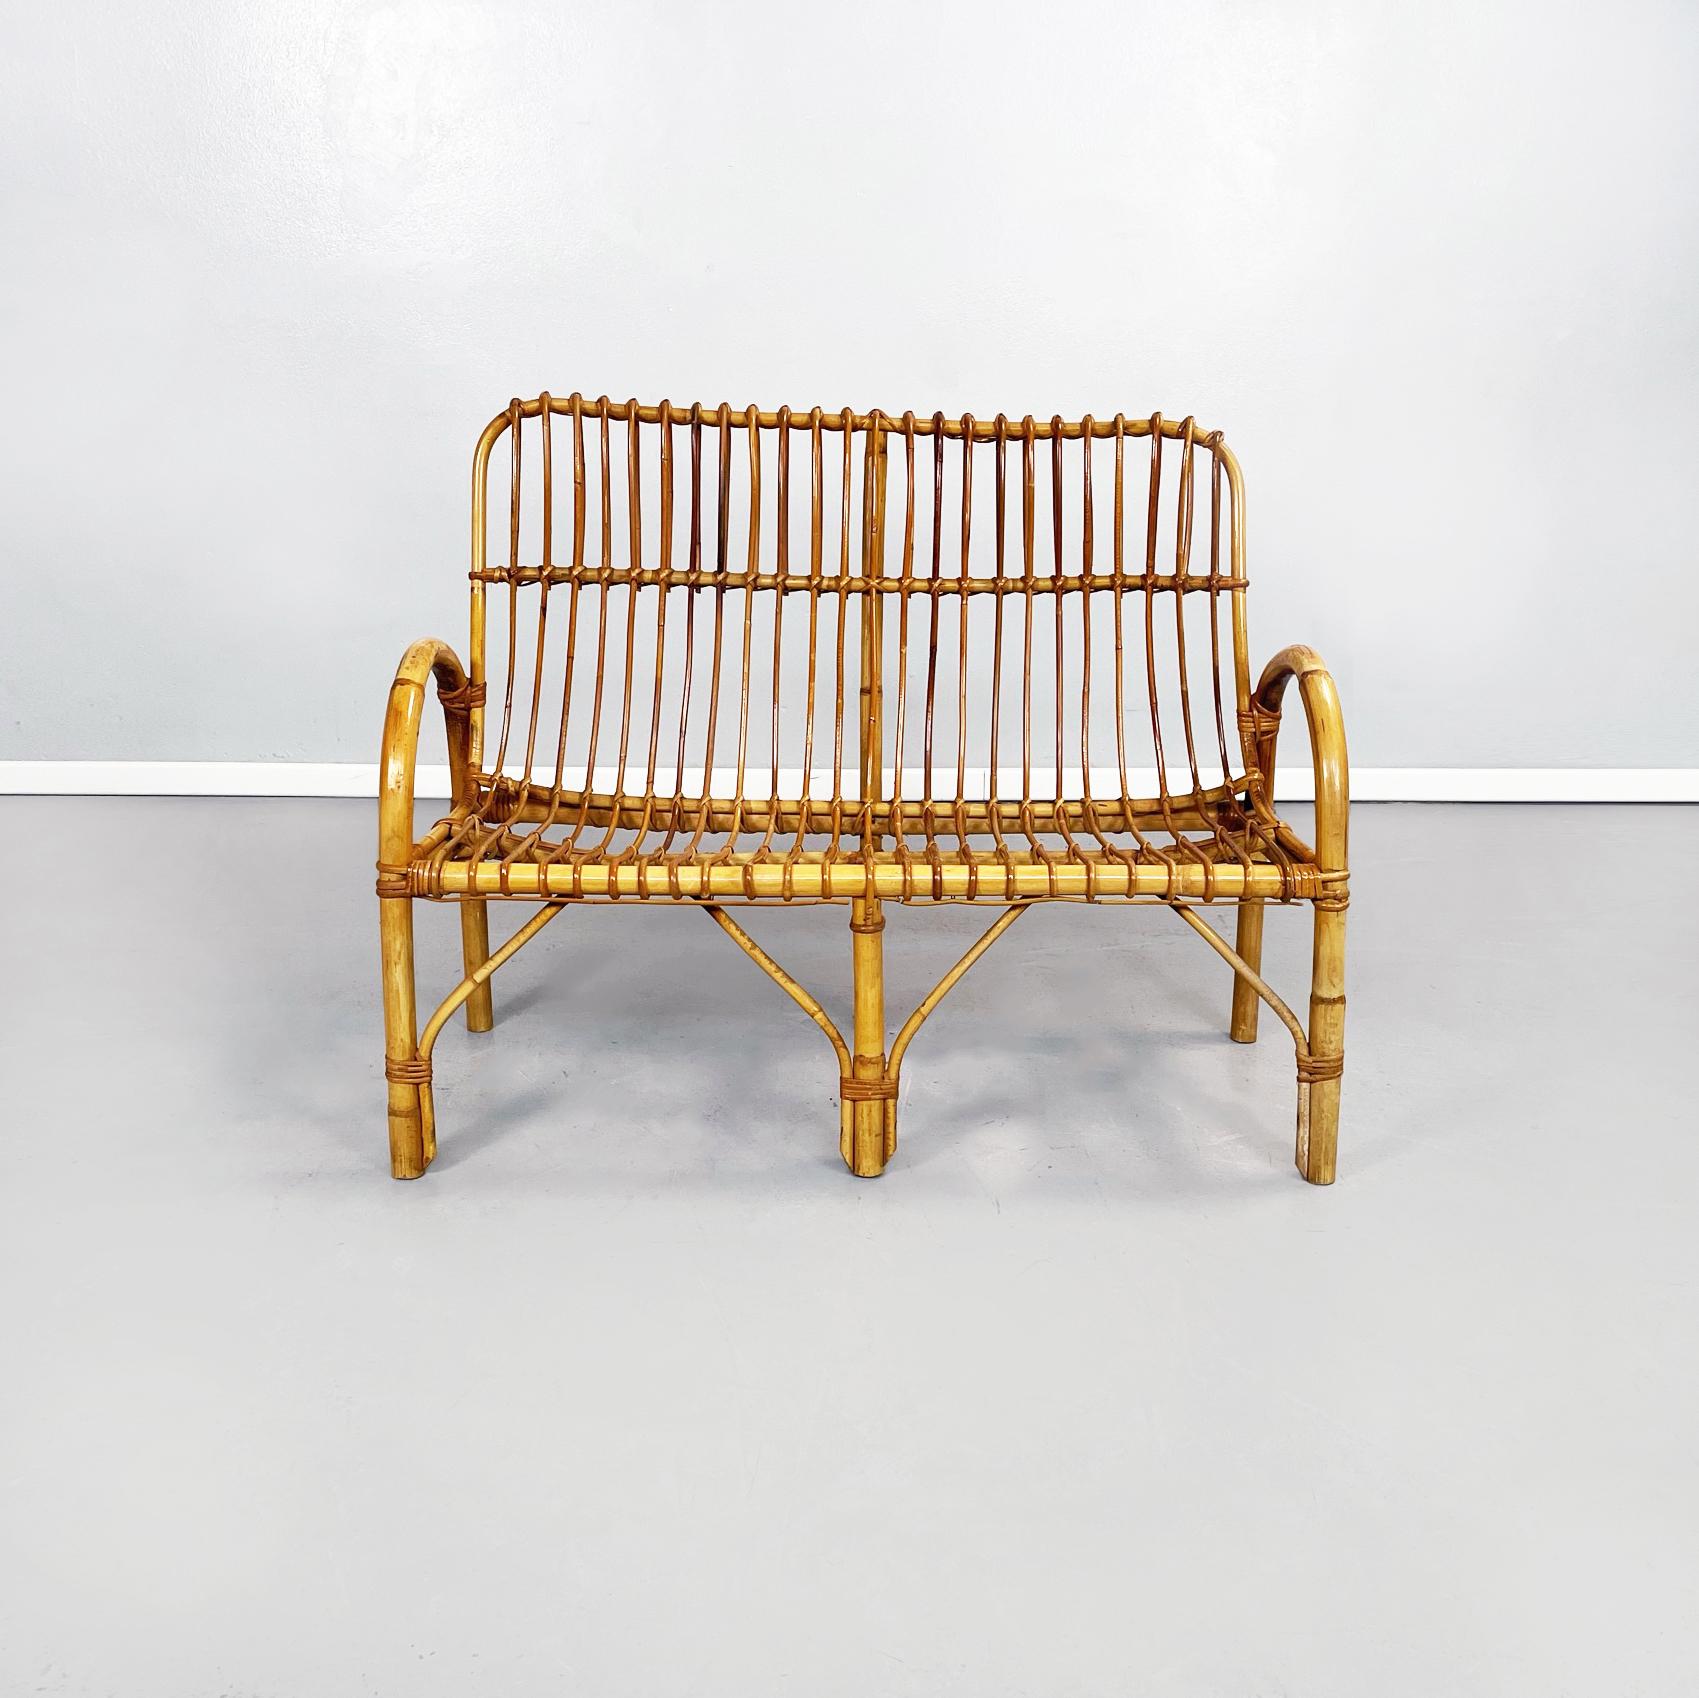 Italian Mid-Century Modern Rattan bench with armrests, 1960s
Bench made of curved rattan canes, with intertwining. The seat and back are slightly curved. The semi-oval armrests are composed of thick rods.
1960s.
Excellent conditions, in original